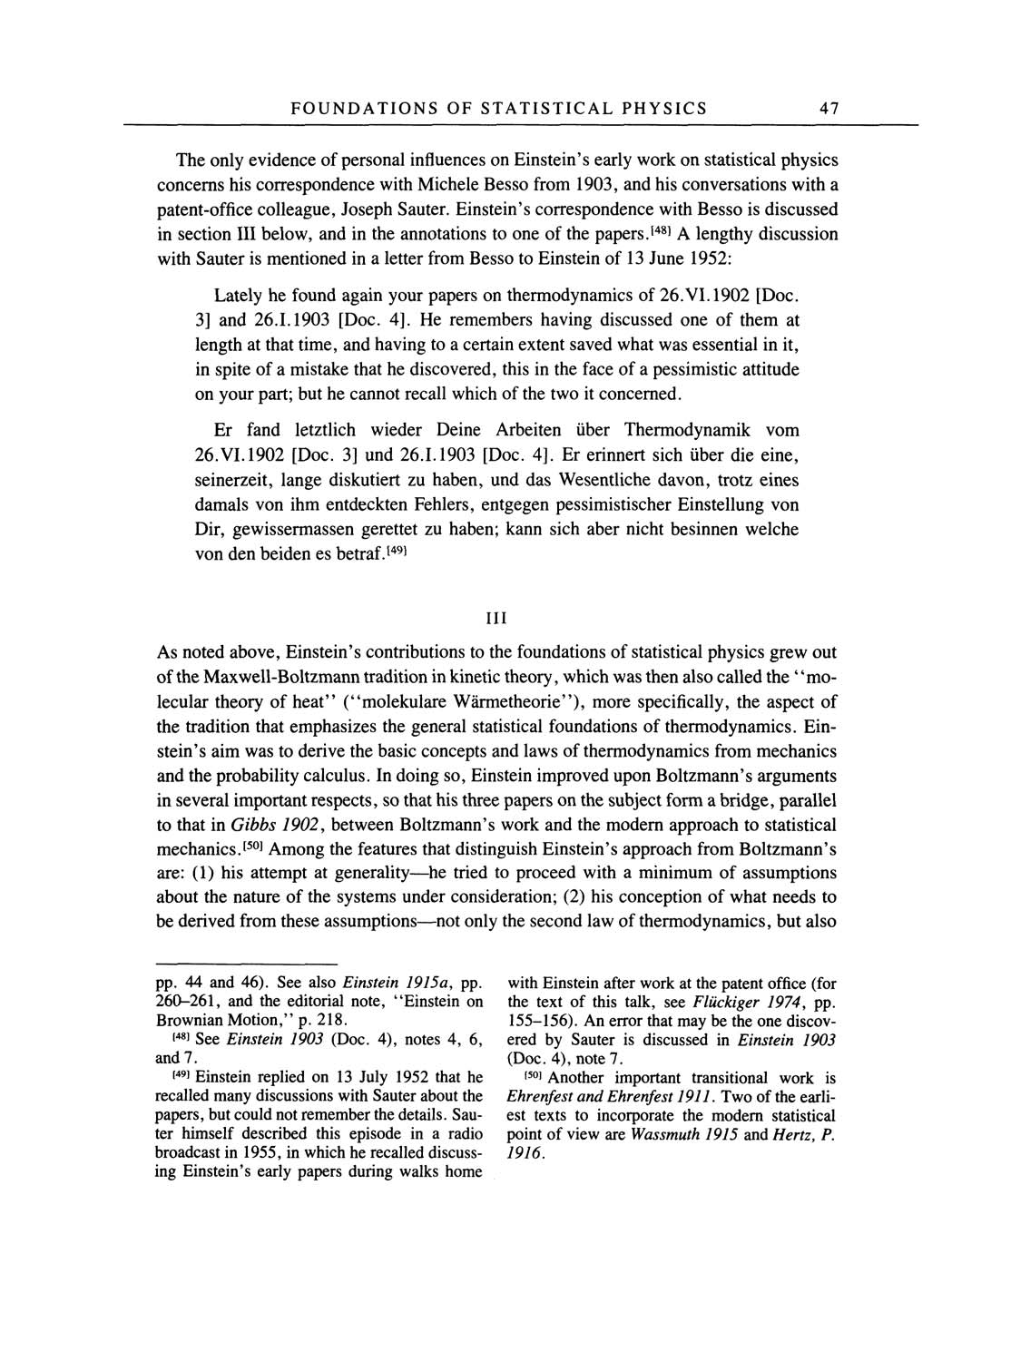 Volume 2: The Swiss Years: Writings, 1900-1909 page 47